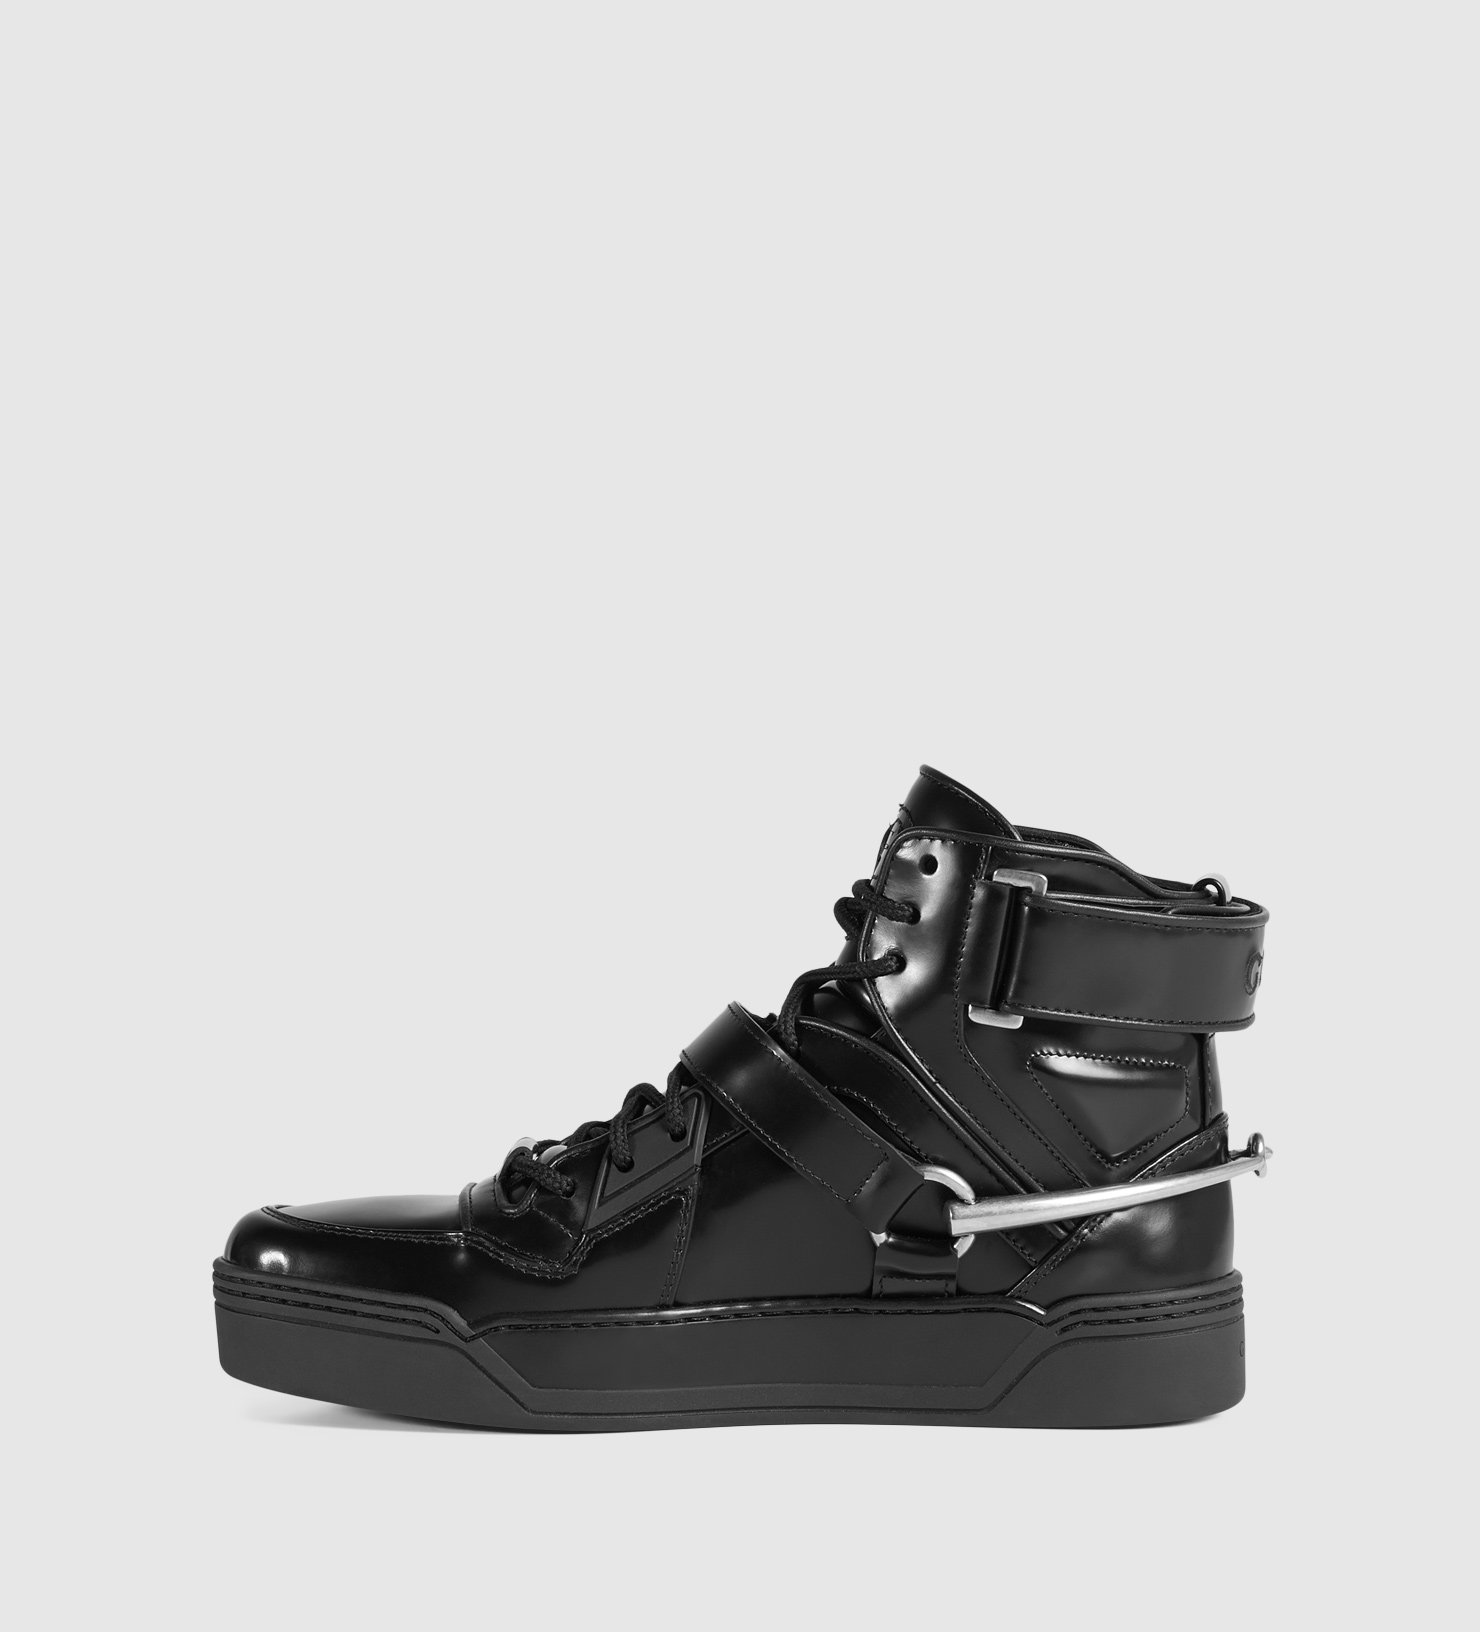 shiny high top sneakers